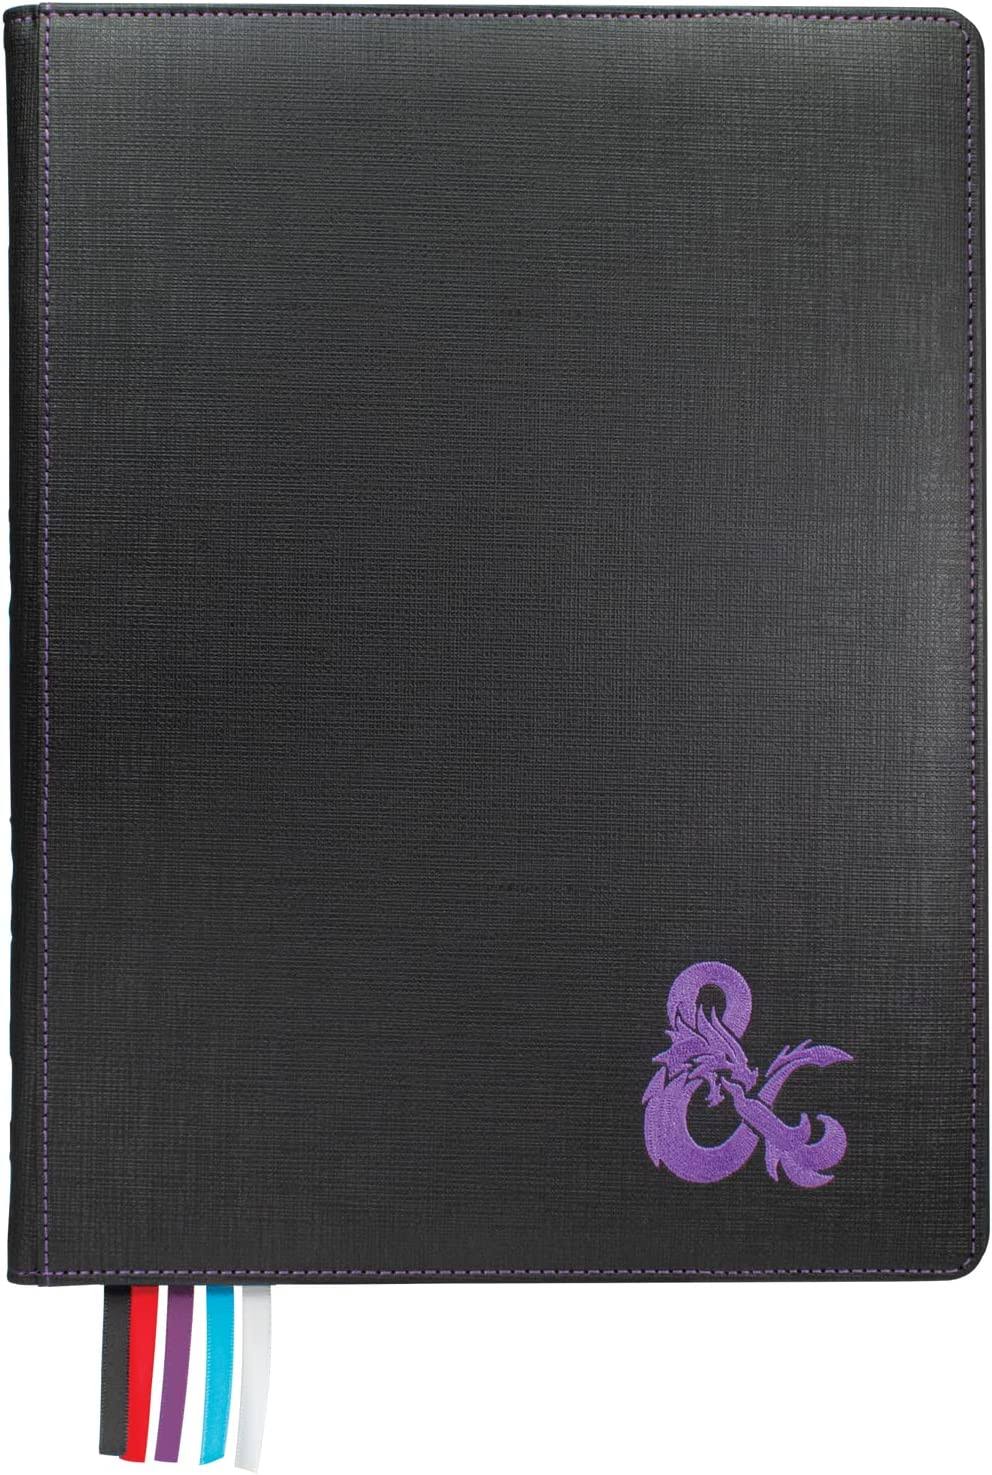 Dungeons & Dragons Dungeon Master's Guide Premium Book Cover